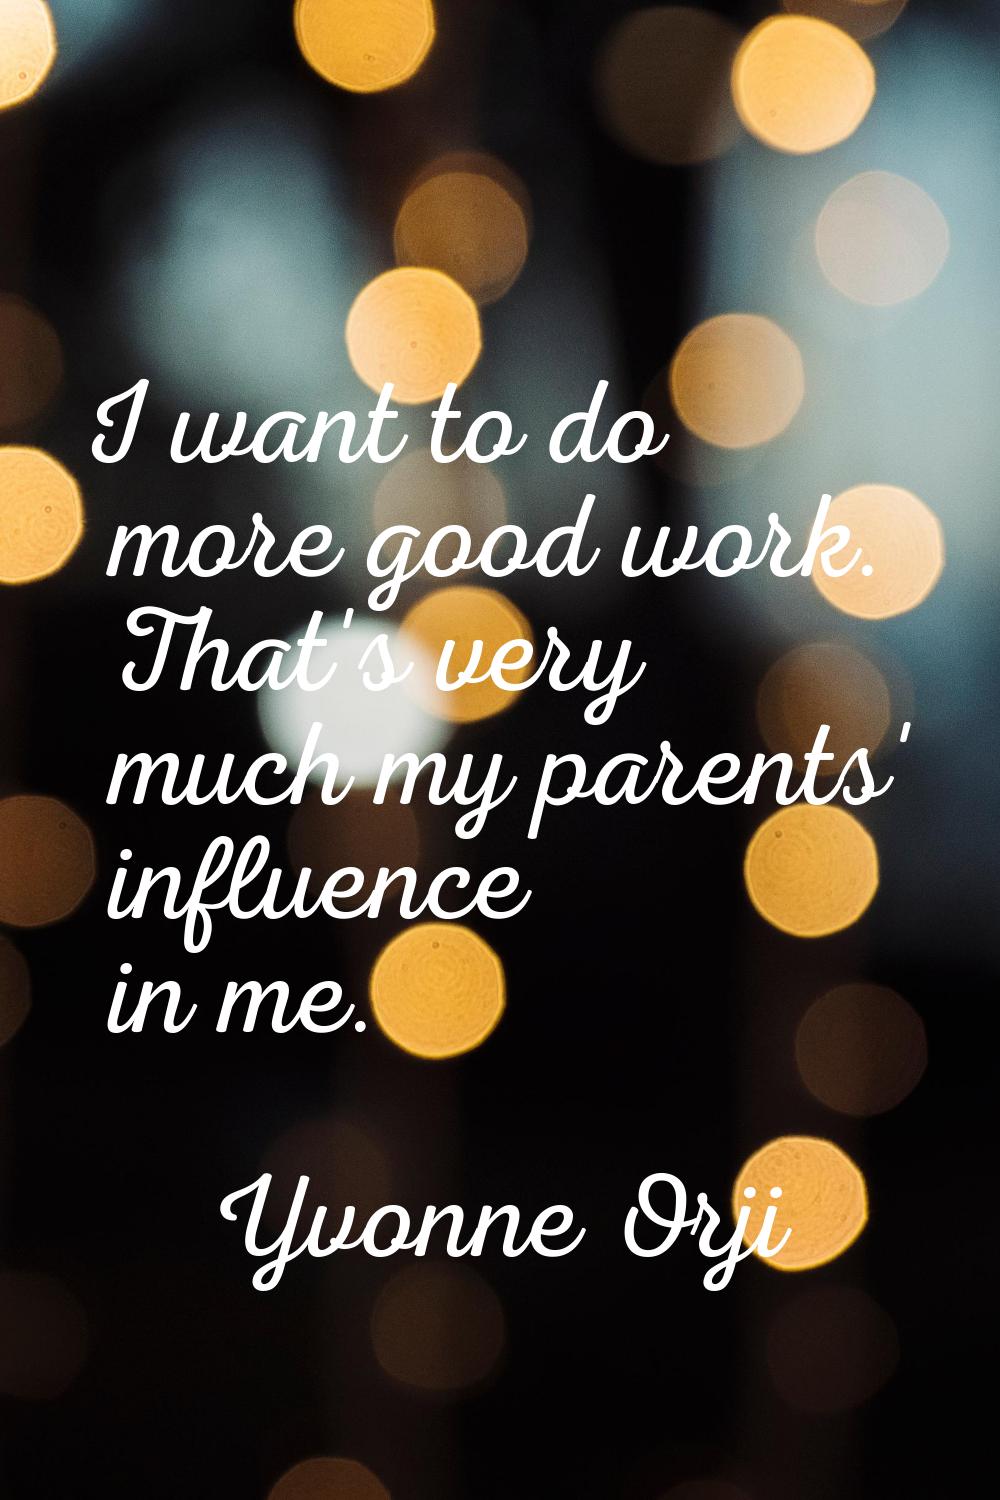 I want to do more good work. That's very much my parents' influence in me.